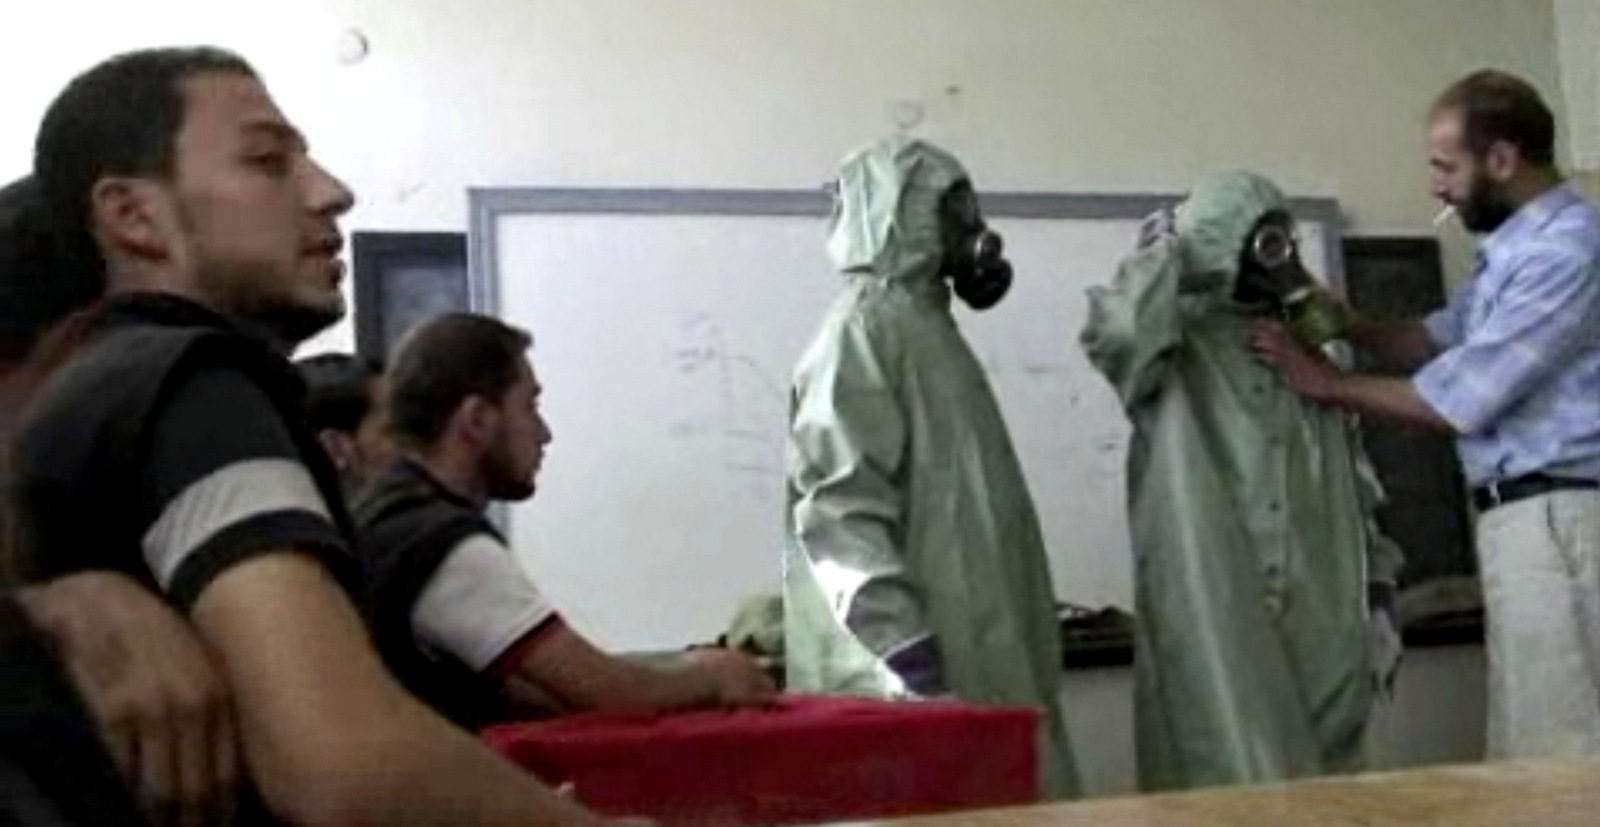 Unidentified men adjust a gas mask and protective suit on a student during a classroom session in then militant-controlled Aleppo, Syria, Sept. 18, 2013. (AP Photo via AP video)